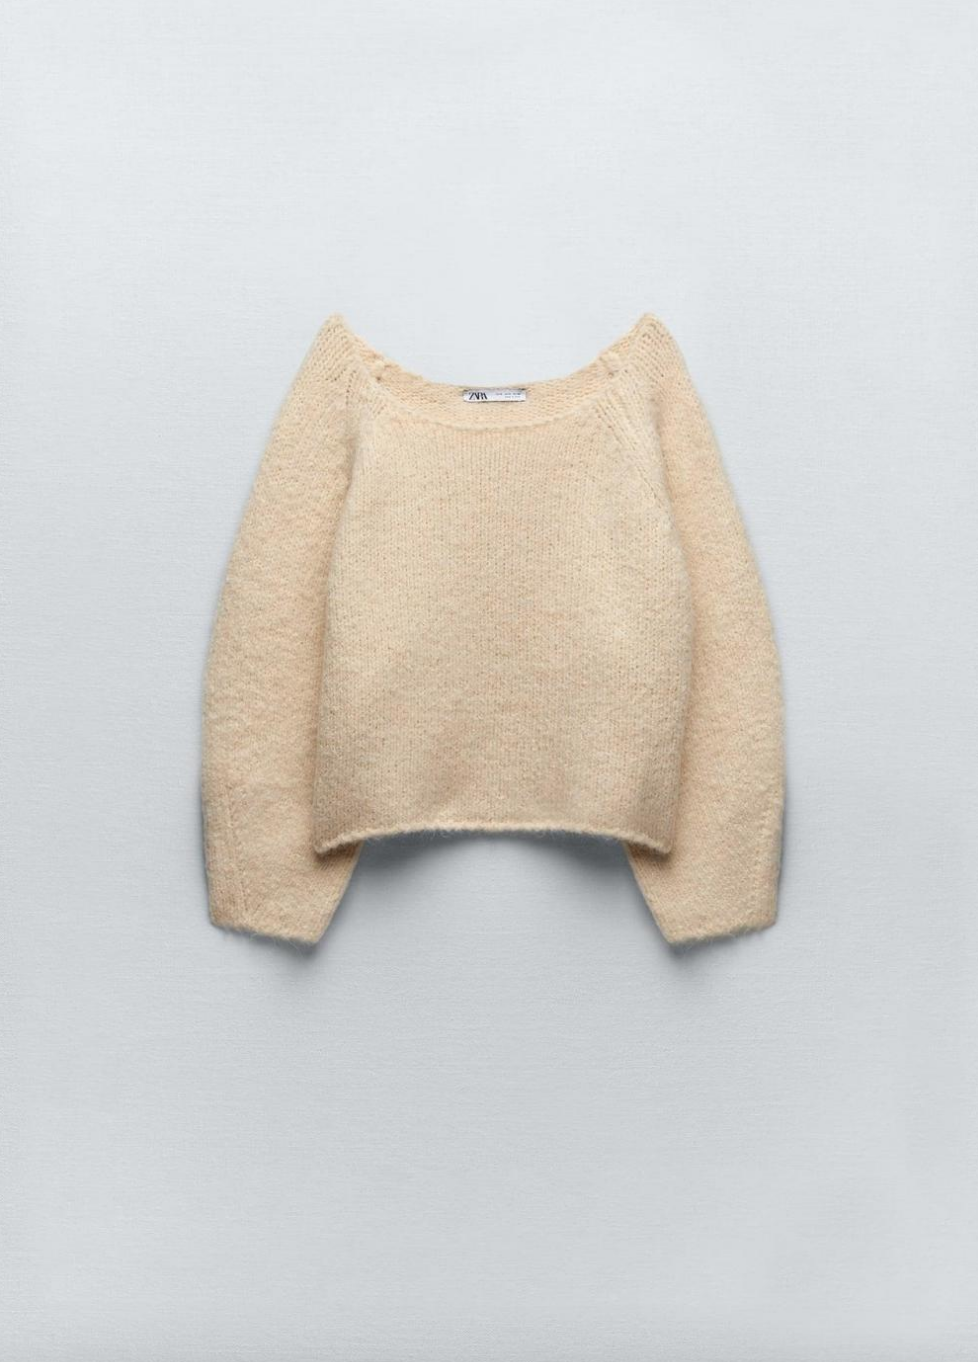 Madison LeCroy's Tan Off The Shoulder Sweater